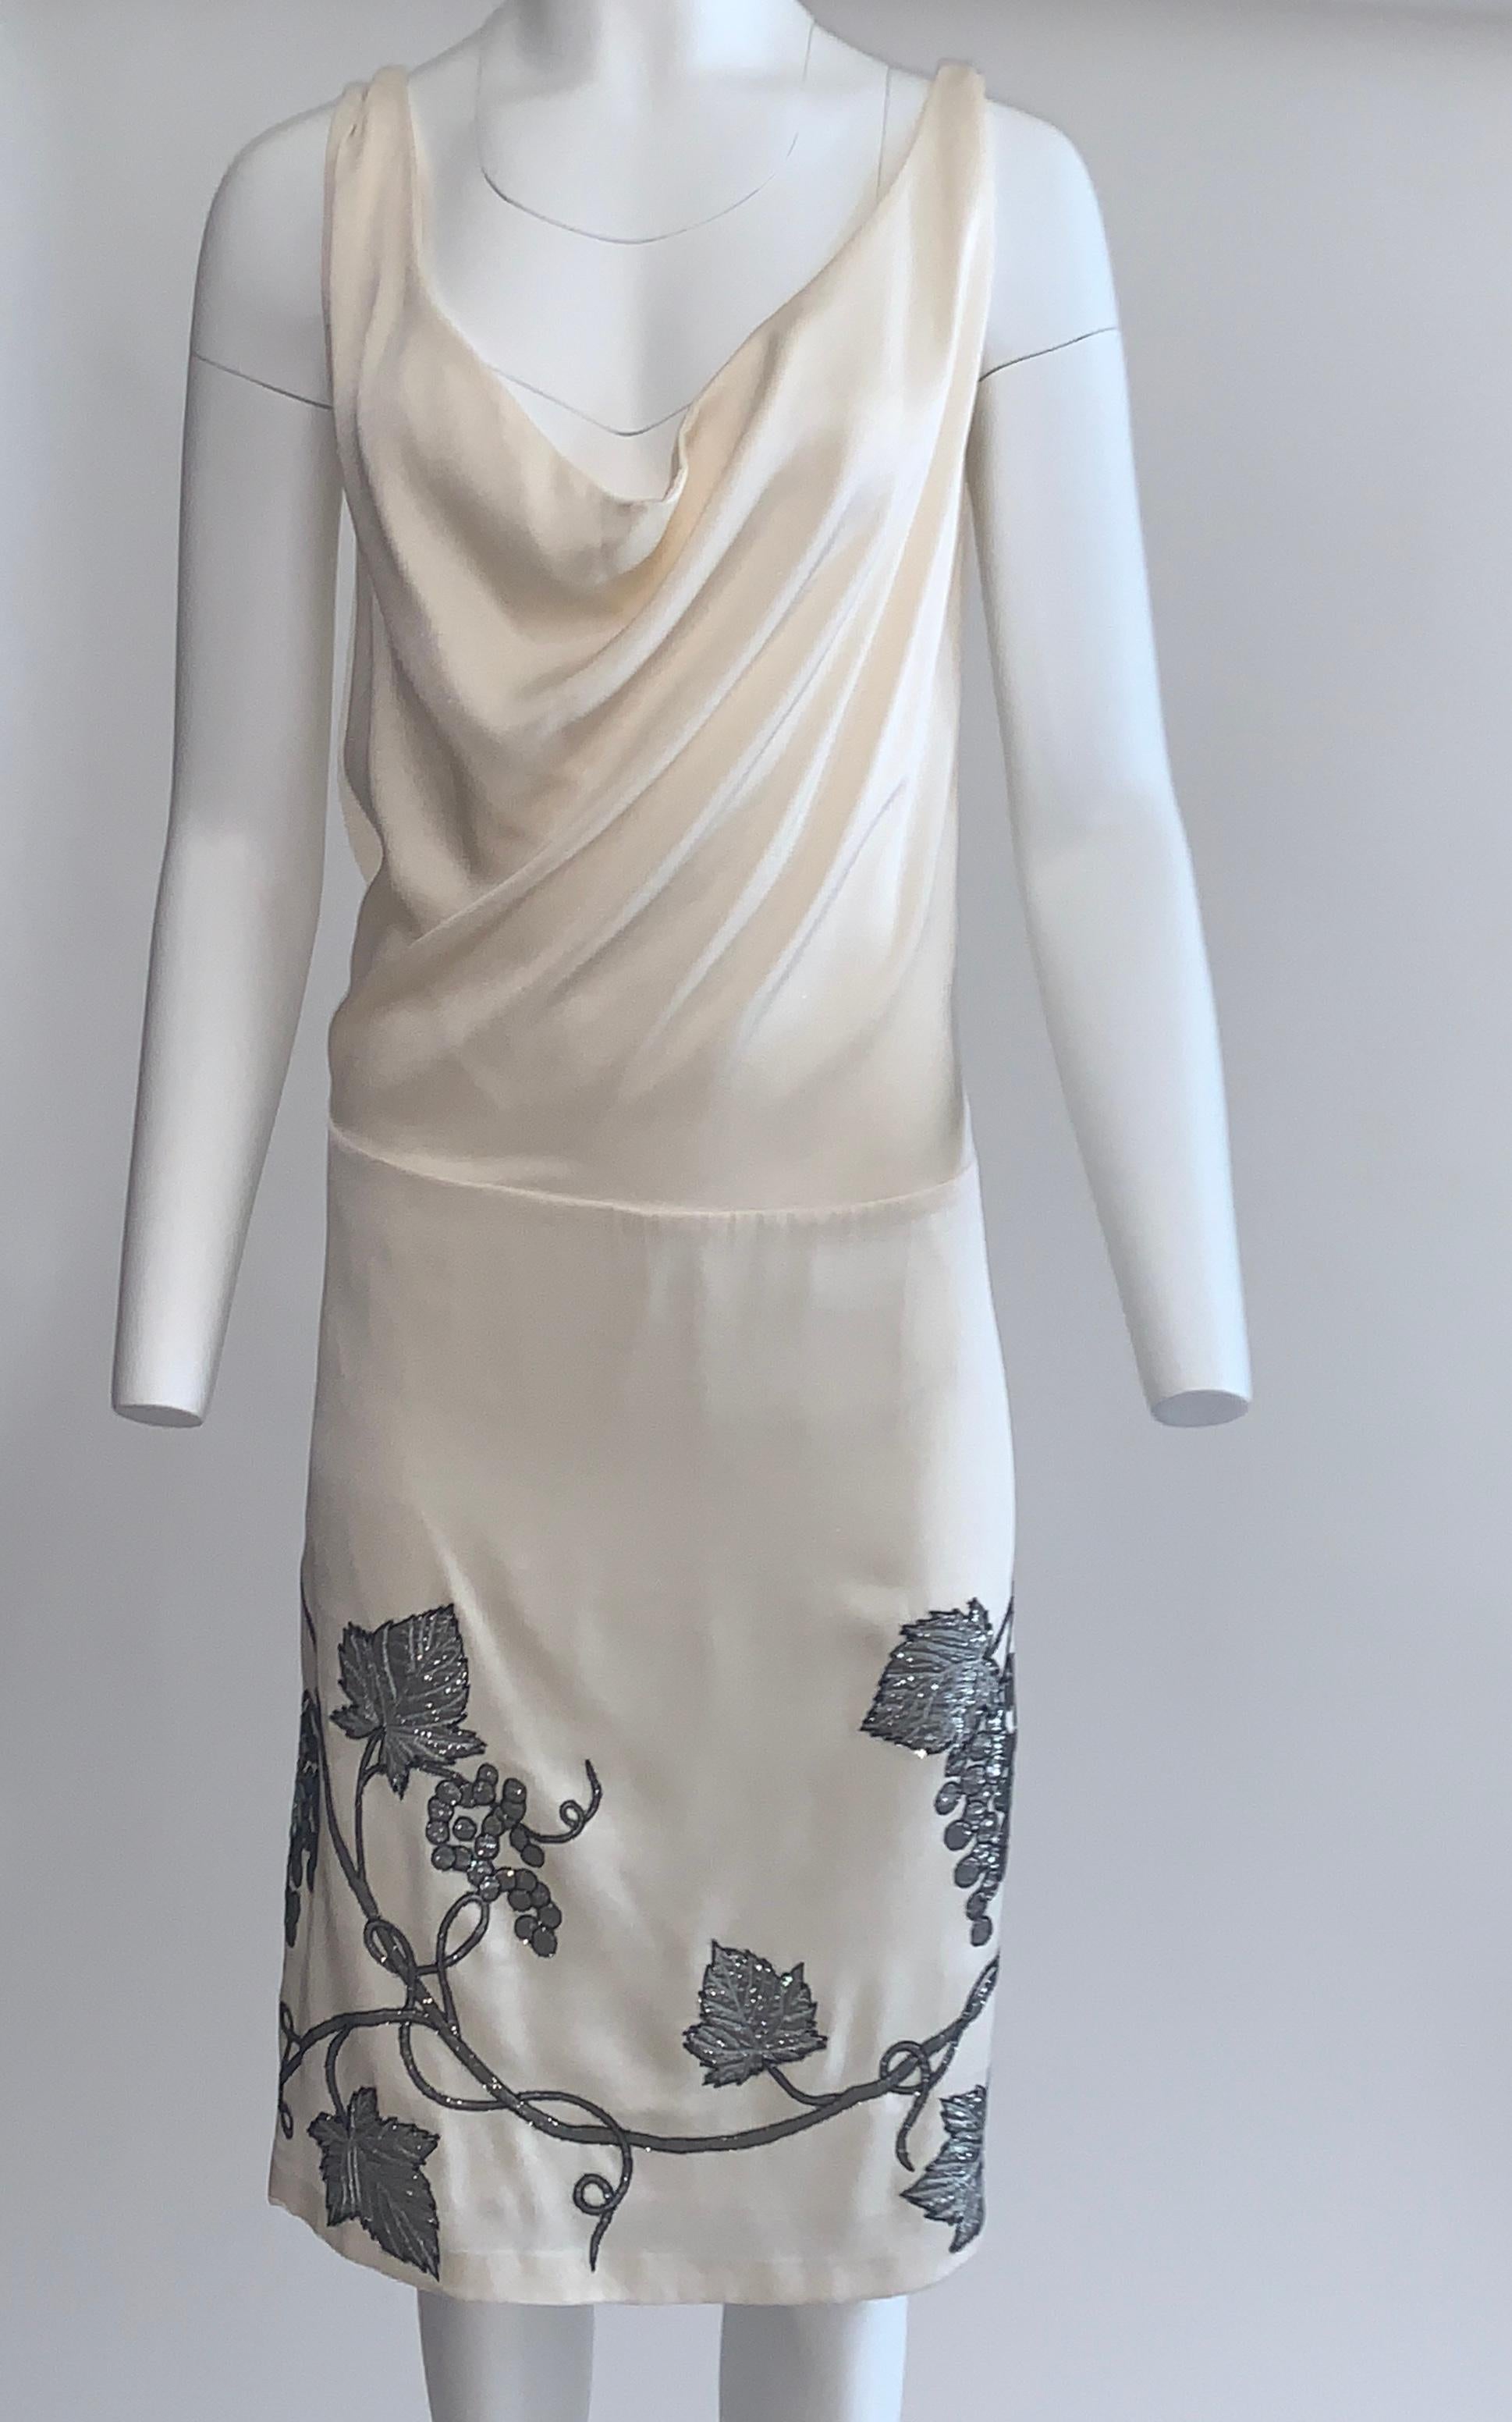 Rare Alexander McQueen cream silk dress with draped cowl neck and silver grape appliqué. Stunning back detail with deep scoop and ruching at center.  No closure, pull on. A truly iconic McQueen piece! 

100% silk.
Fully lined in 100% silk.

Made in